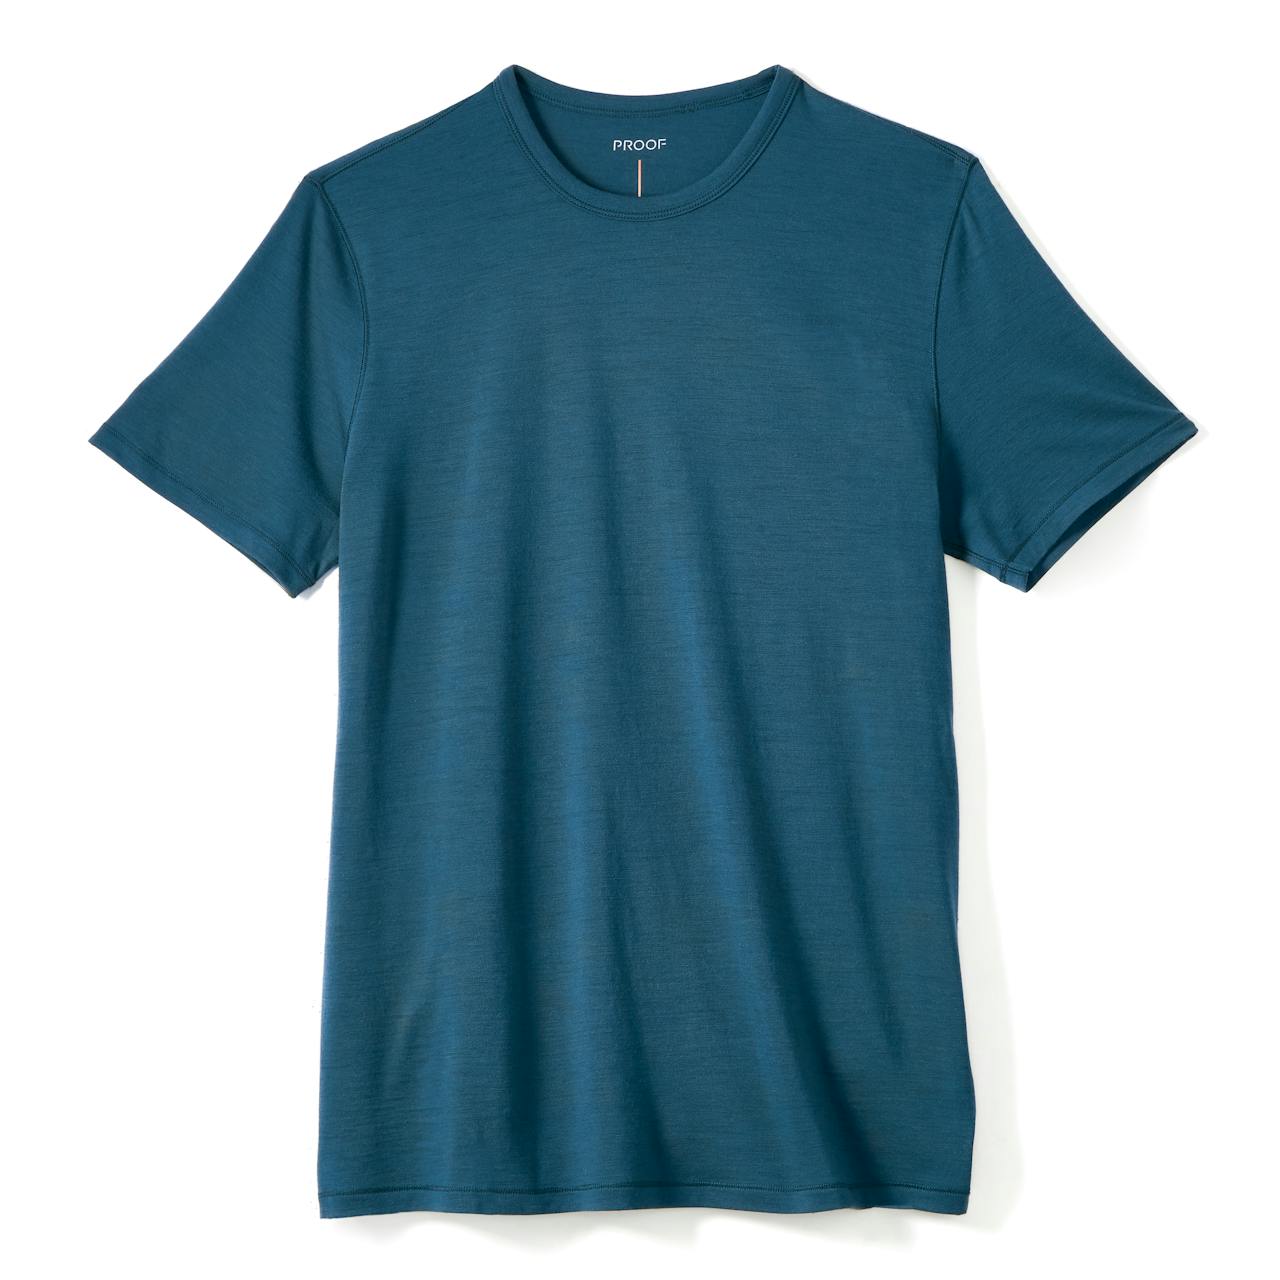 Stay Ahead of the Fashion Game with the Full Sleeve Printed Round Neck  T-Shirt - Made with a Soft Cotton Blend for Unmatched Comfort and Style  mens